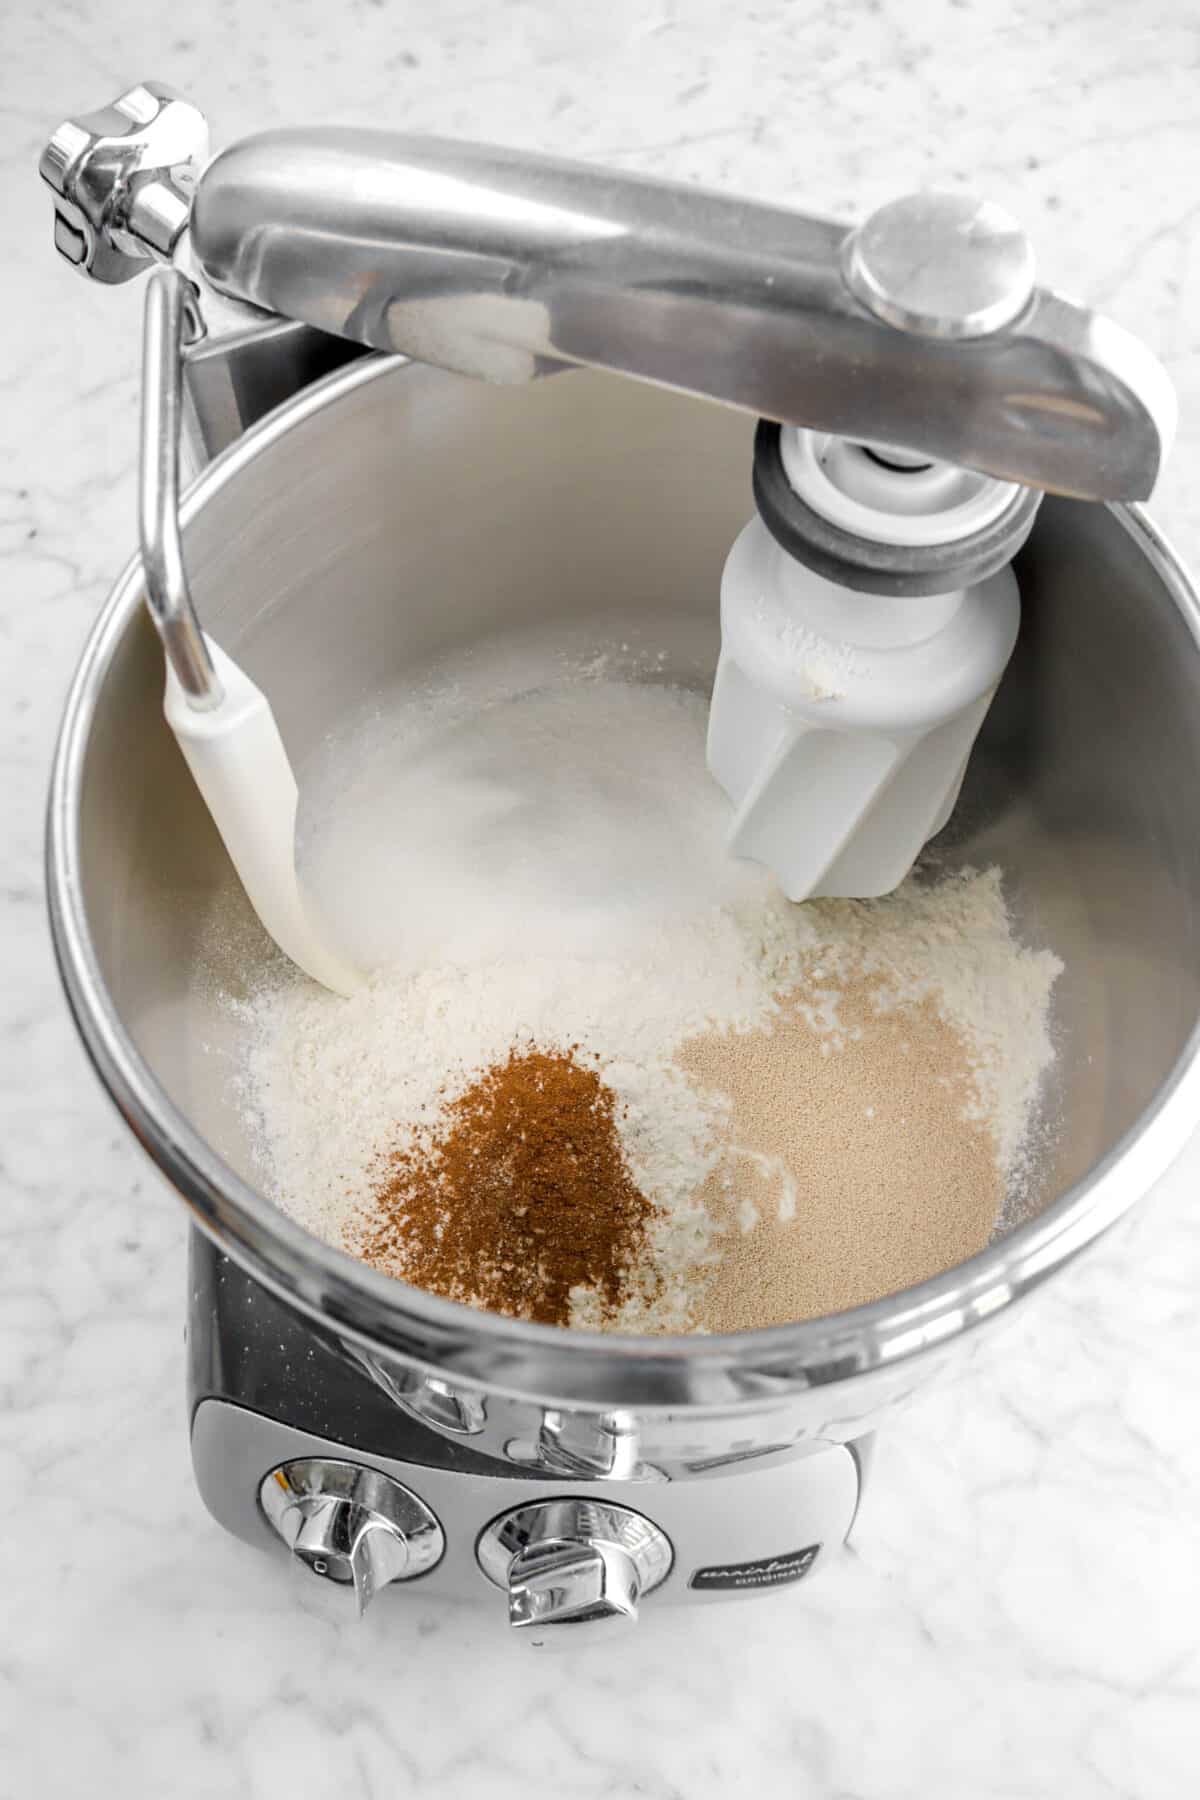 flour, sugar, spice, and yeast in mixer